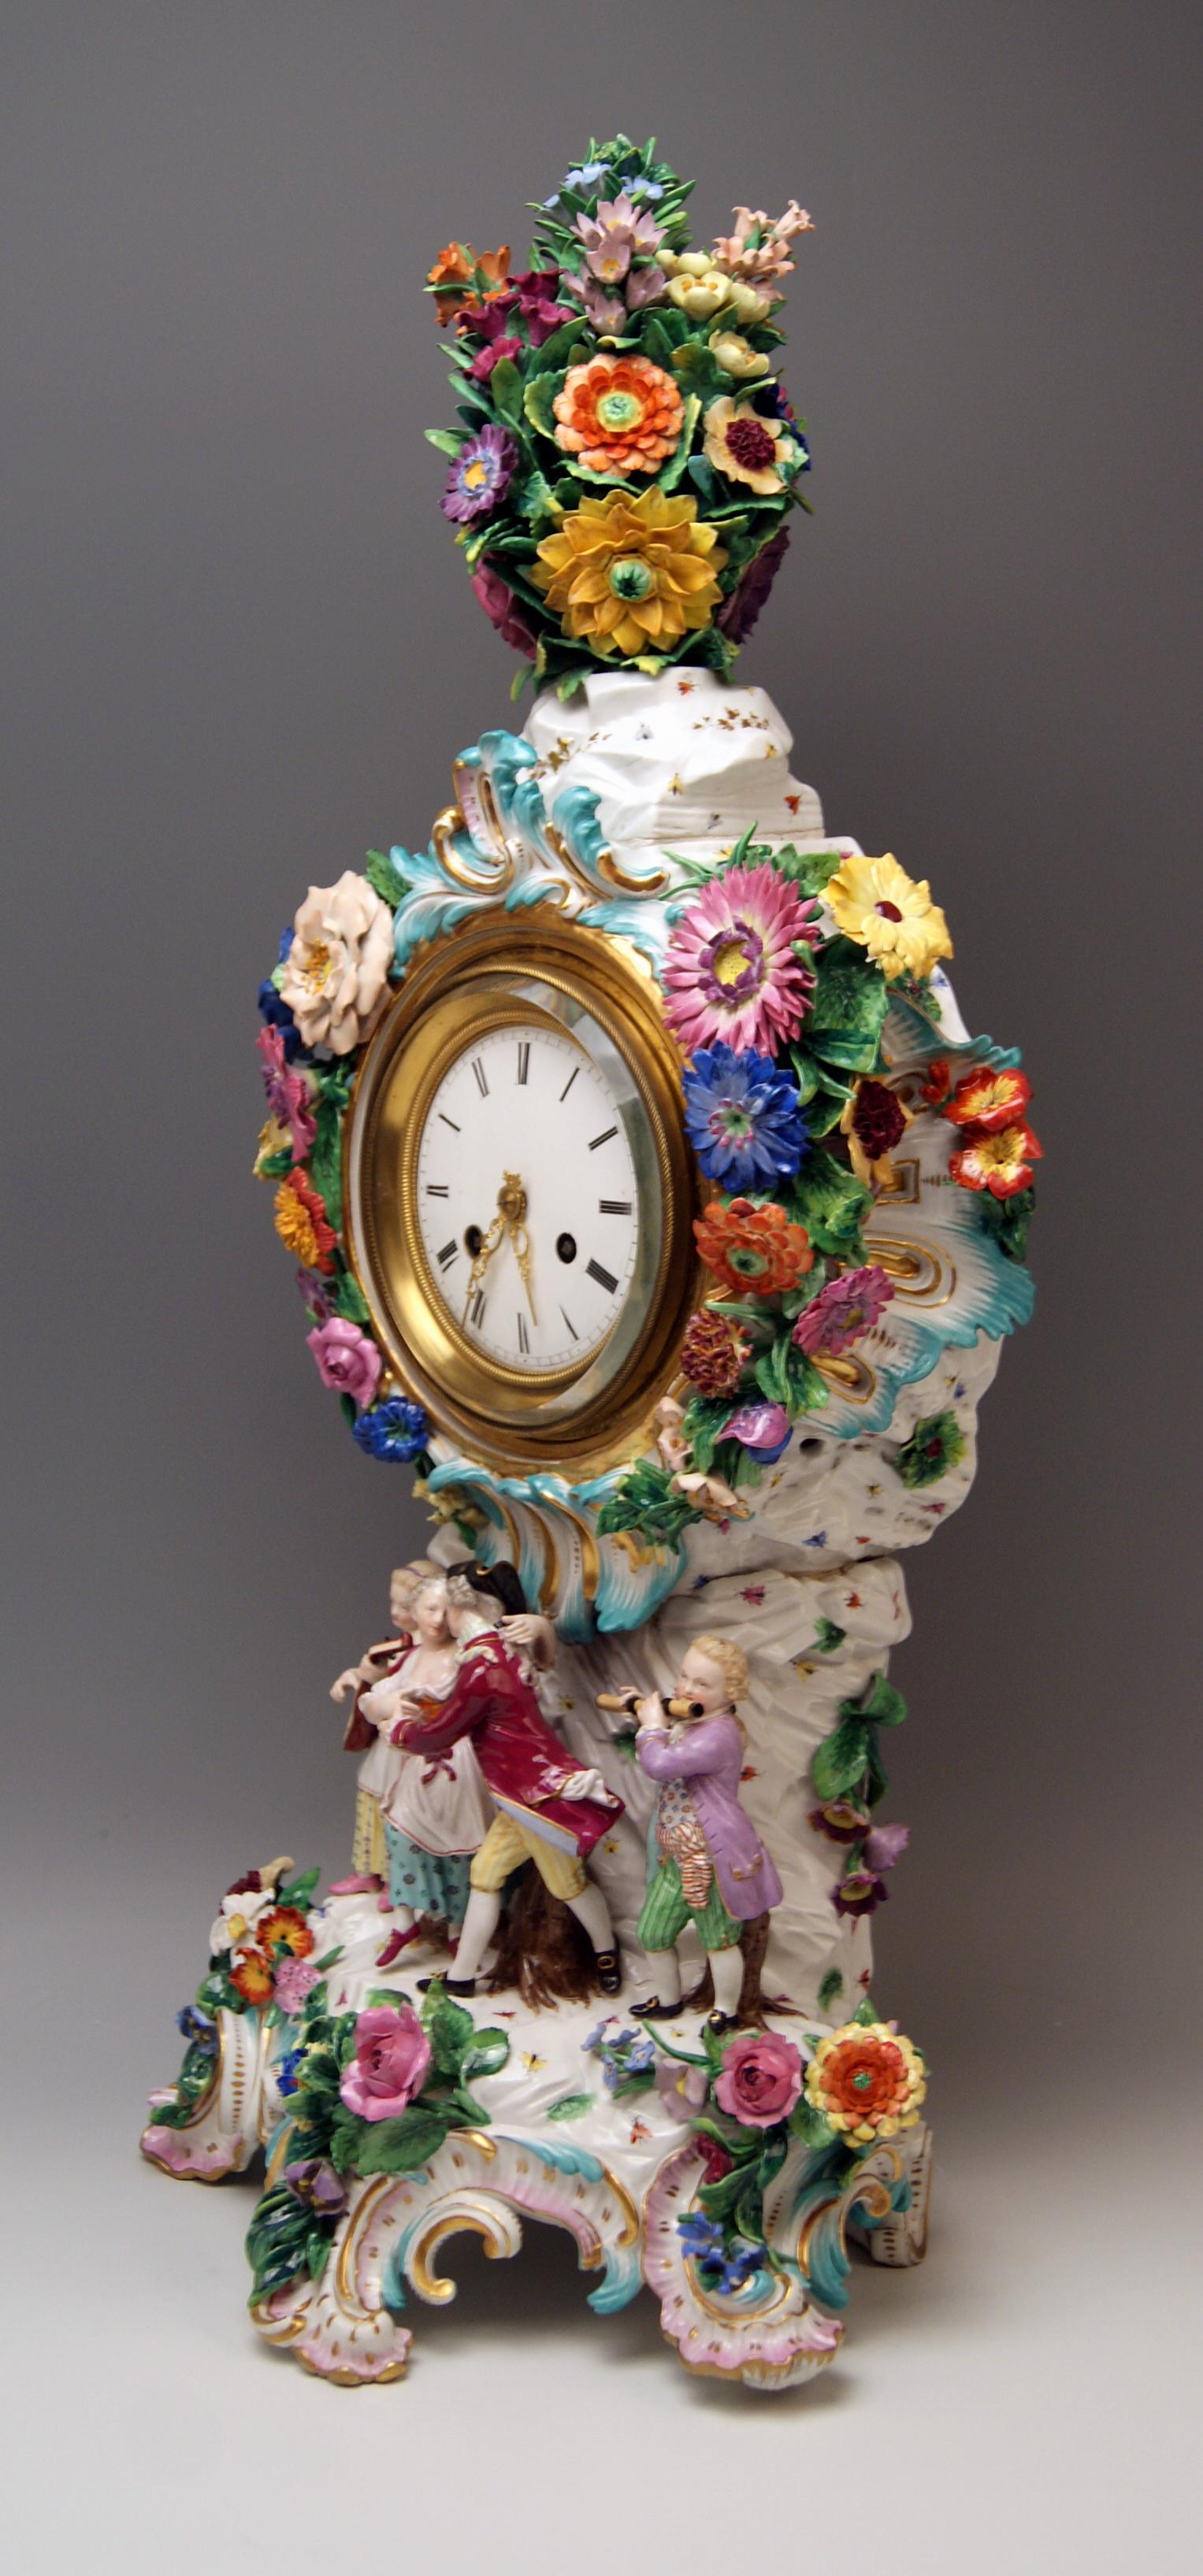 Meissen huge table clock / mantle clock / mantelpiece clock decorated with sculptured flowers and figurines, circa 1880.

Size:
Height 25.98 inches / 66.0 cm
Width 11.81 inches / 30.0 cm
Depth 8.66 inches / 22.0 cm

Manufactory: Meissen
Hallmarked: